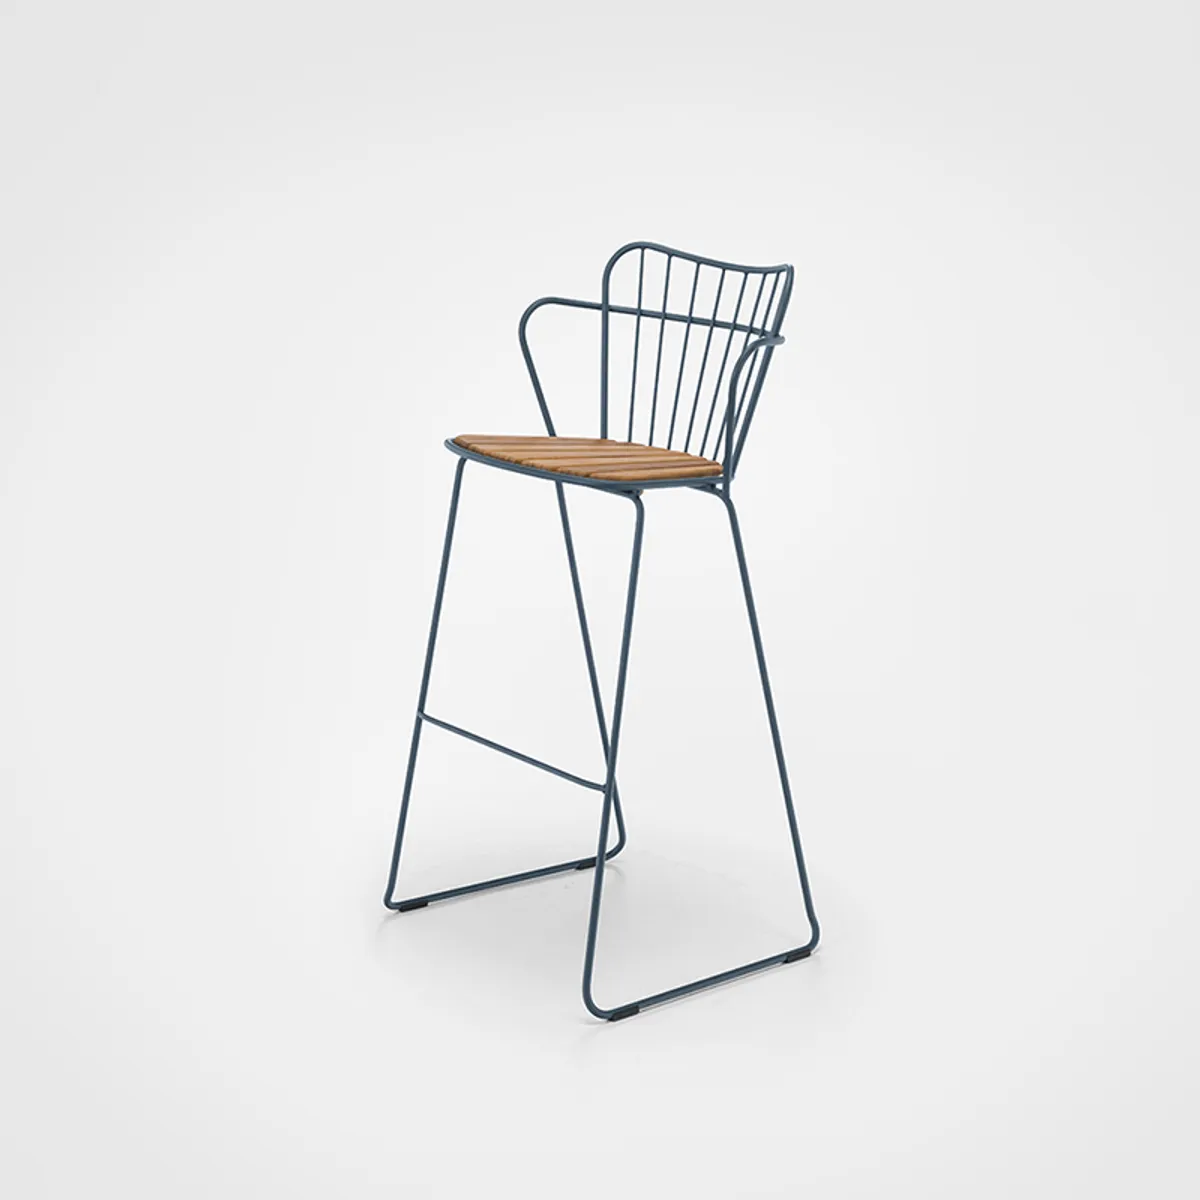 Plumage Bar Stool In Blue Metal With Bamboo Seat Outdoor Furniture For Bars